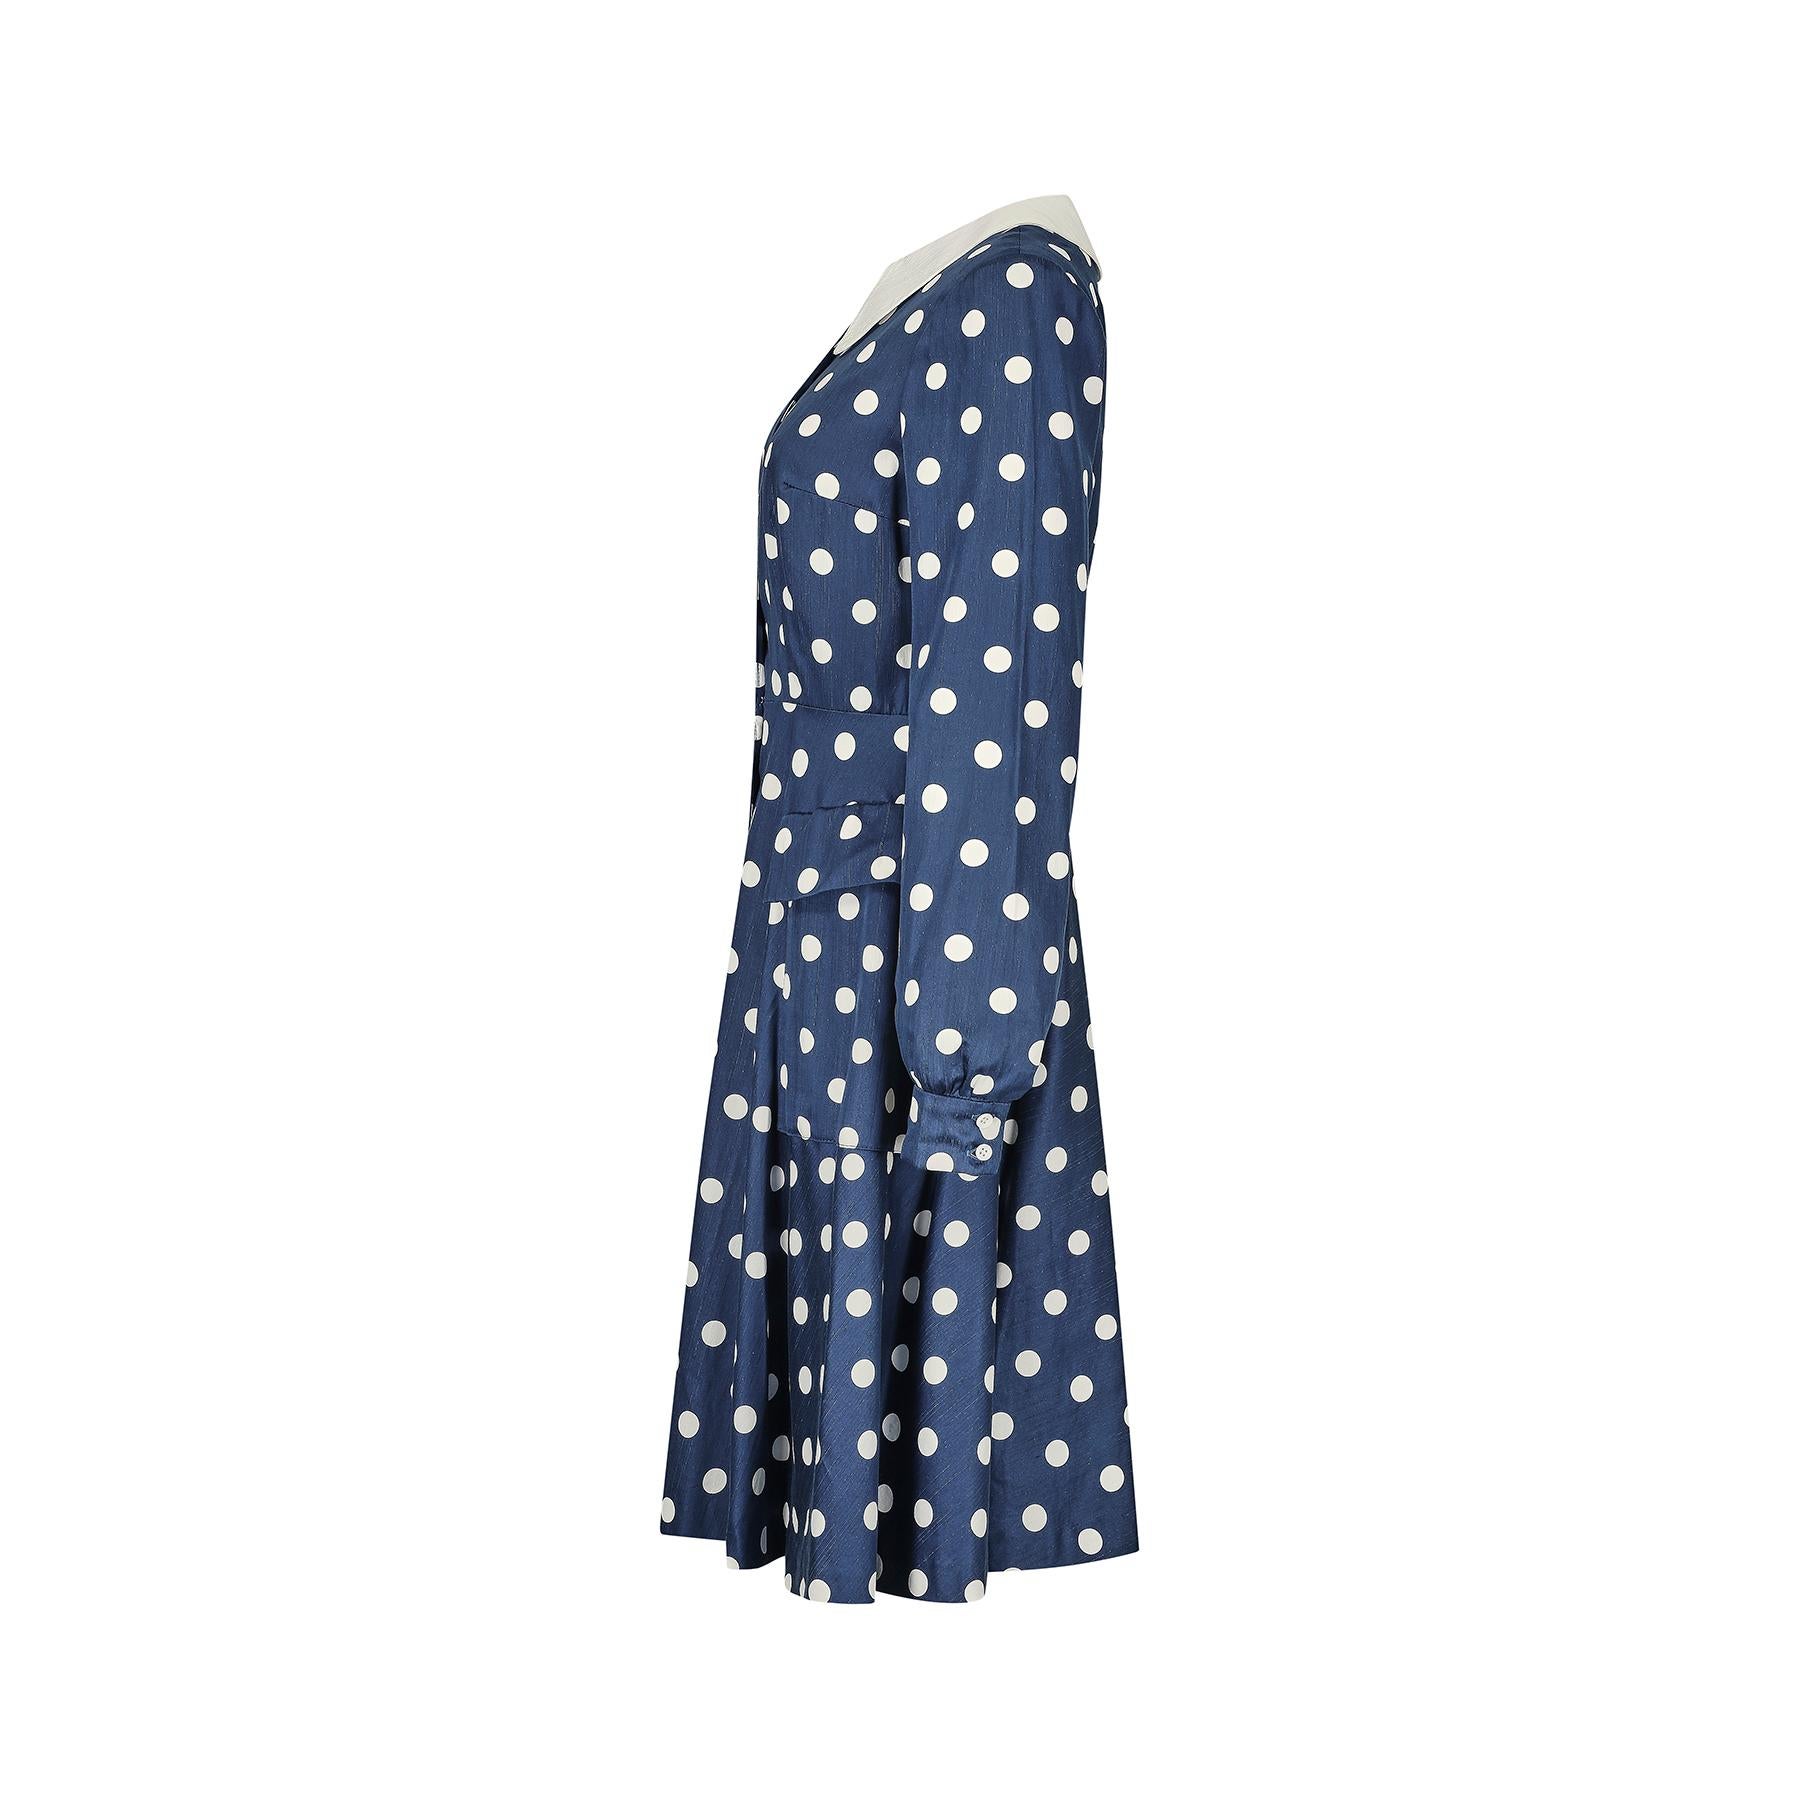 1960s French blue and white polka dot Louis Feraud for Rembrandt mod style dress.  The fabric is probably a cotton or blend and of excellent quality. A classic shirtwaister design featuring a stiffened Peter Pan collar and the central button stand